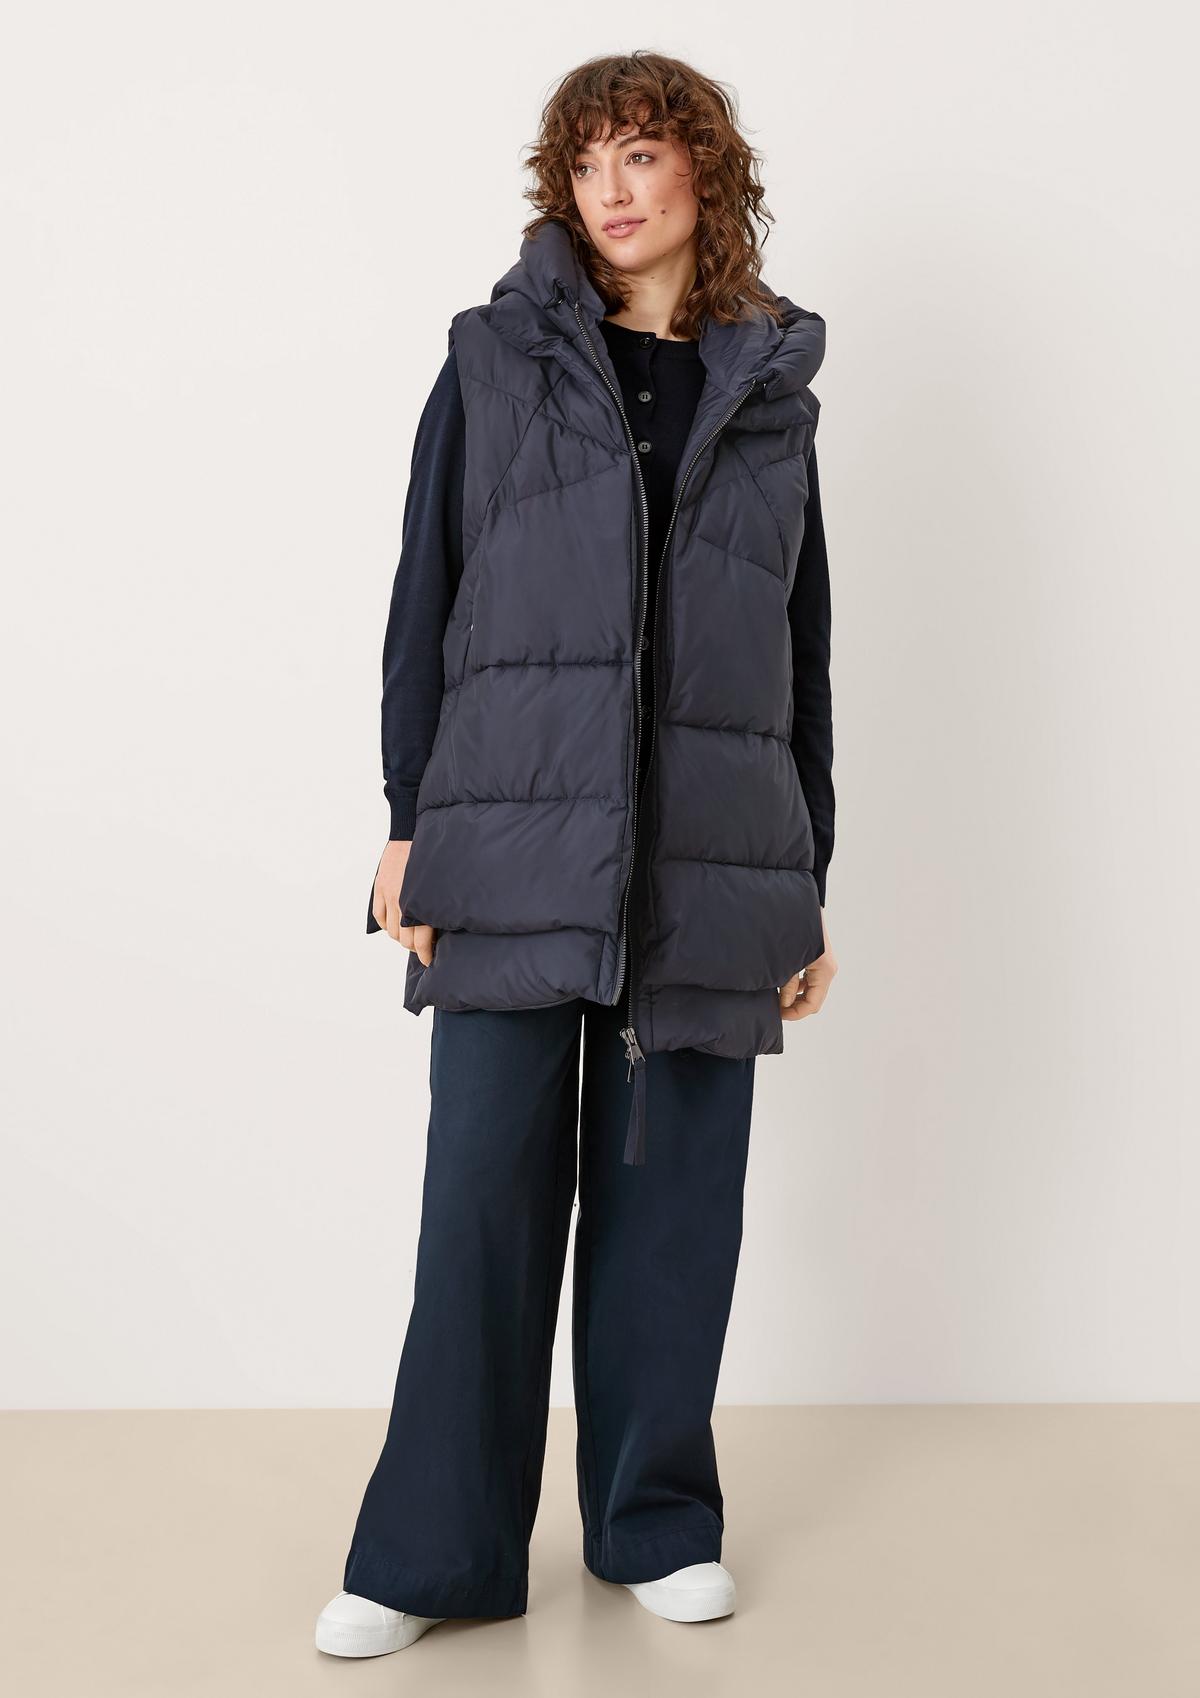 s.Oliver Body warmer in a layered look